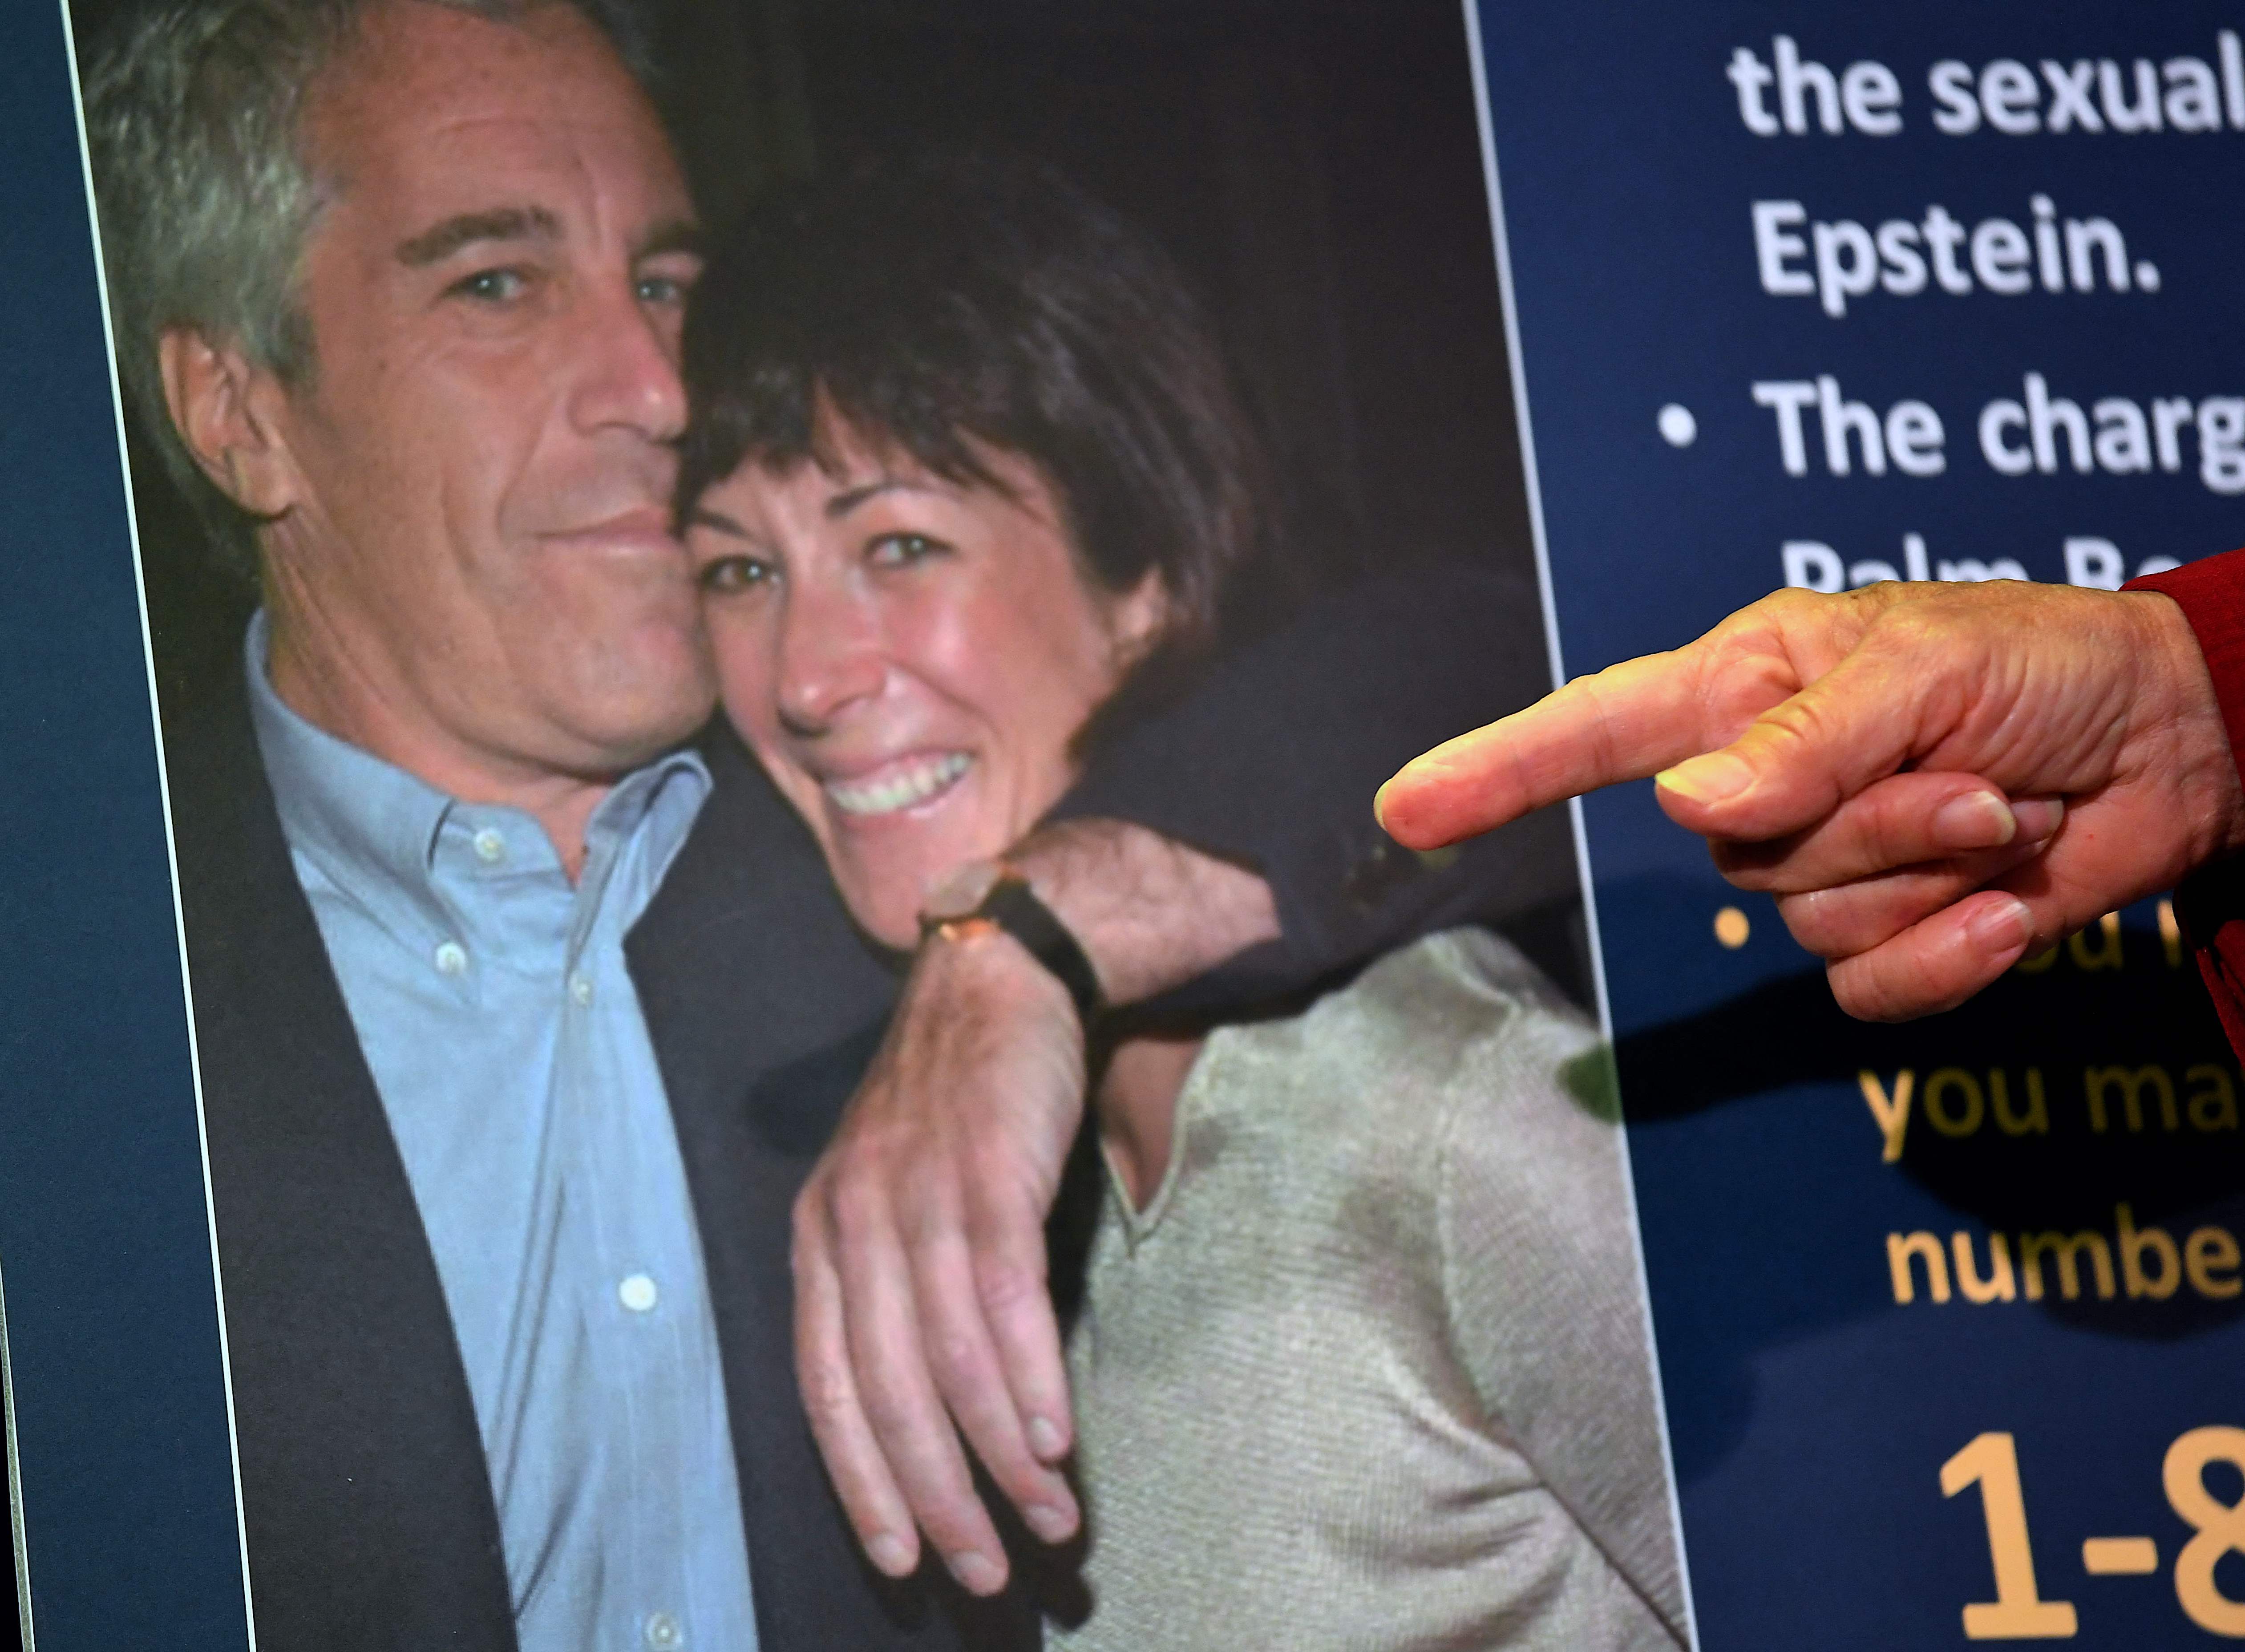 File photo: A federal judge ordered dozens of documents about Ghislaine Maxwell’s personal affairs to be unsealed in the next two weeks